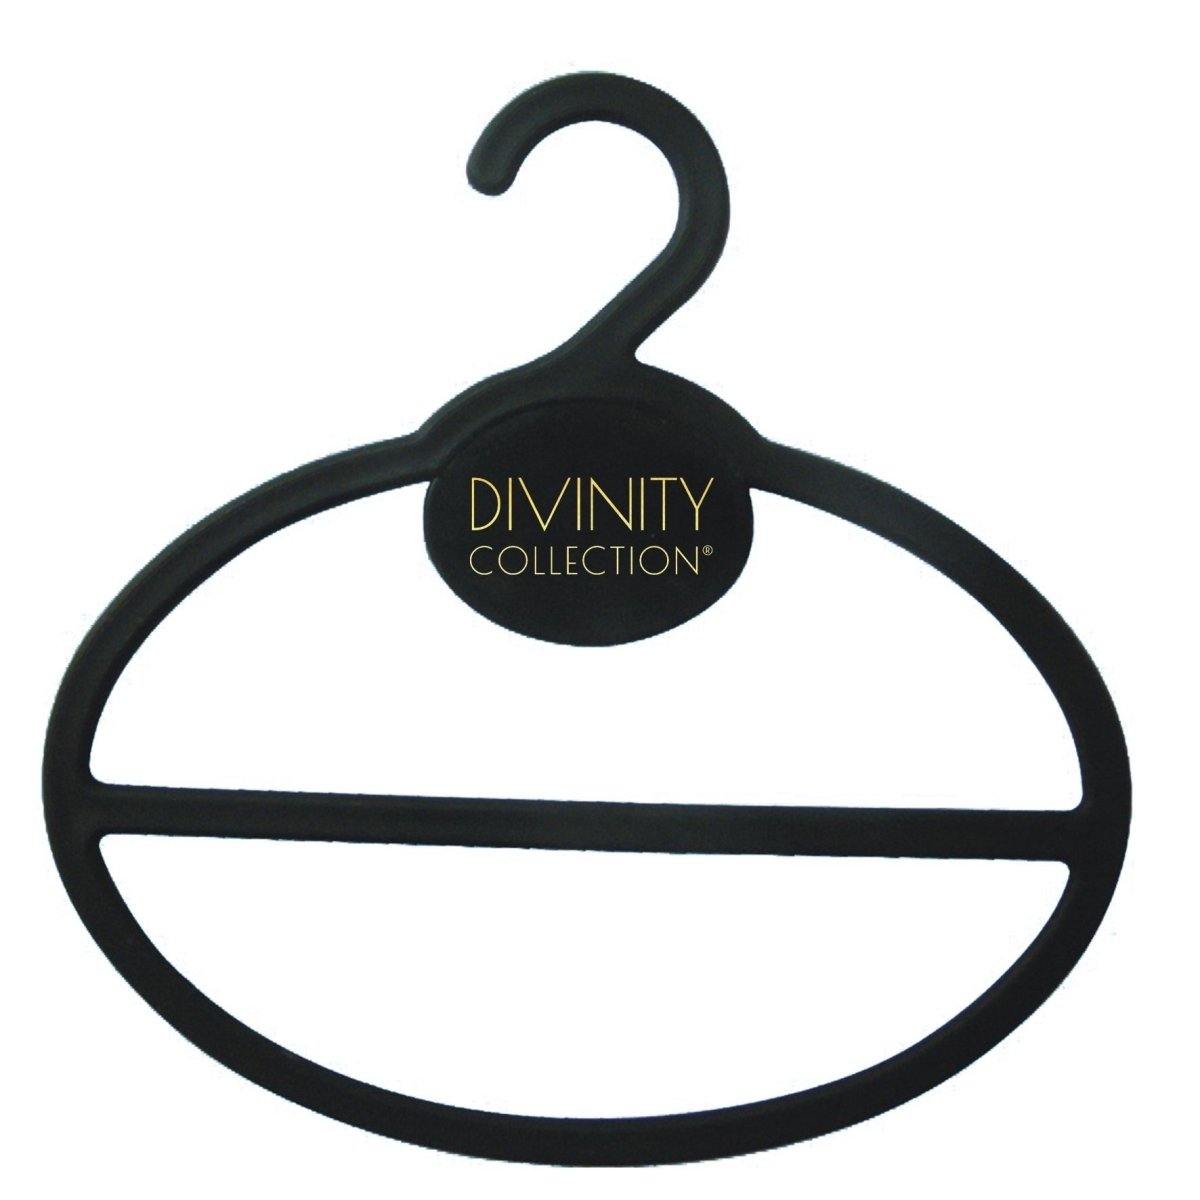 Scarf (Hijab) Hanger - Divinity Collection